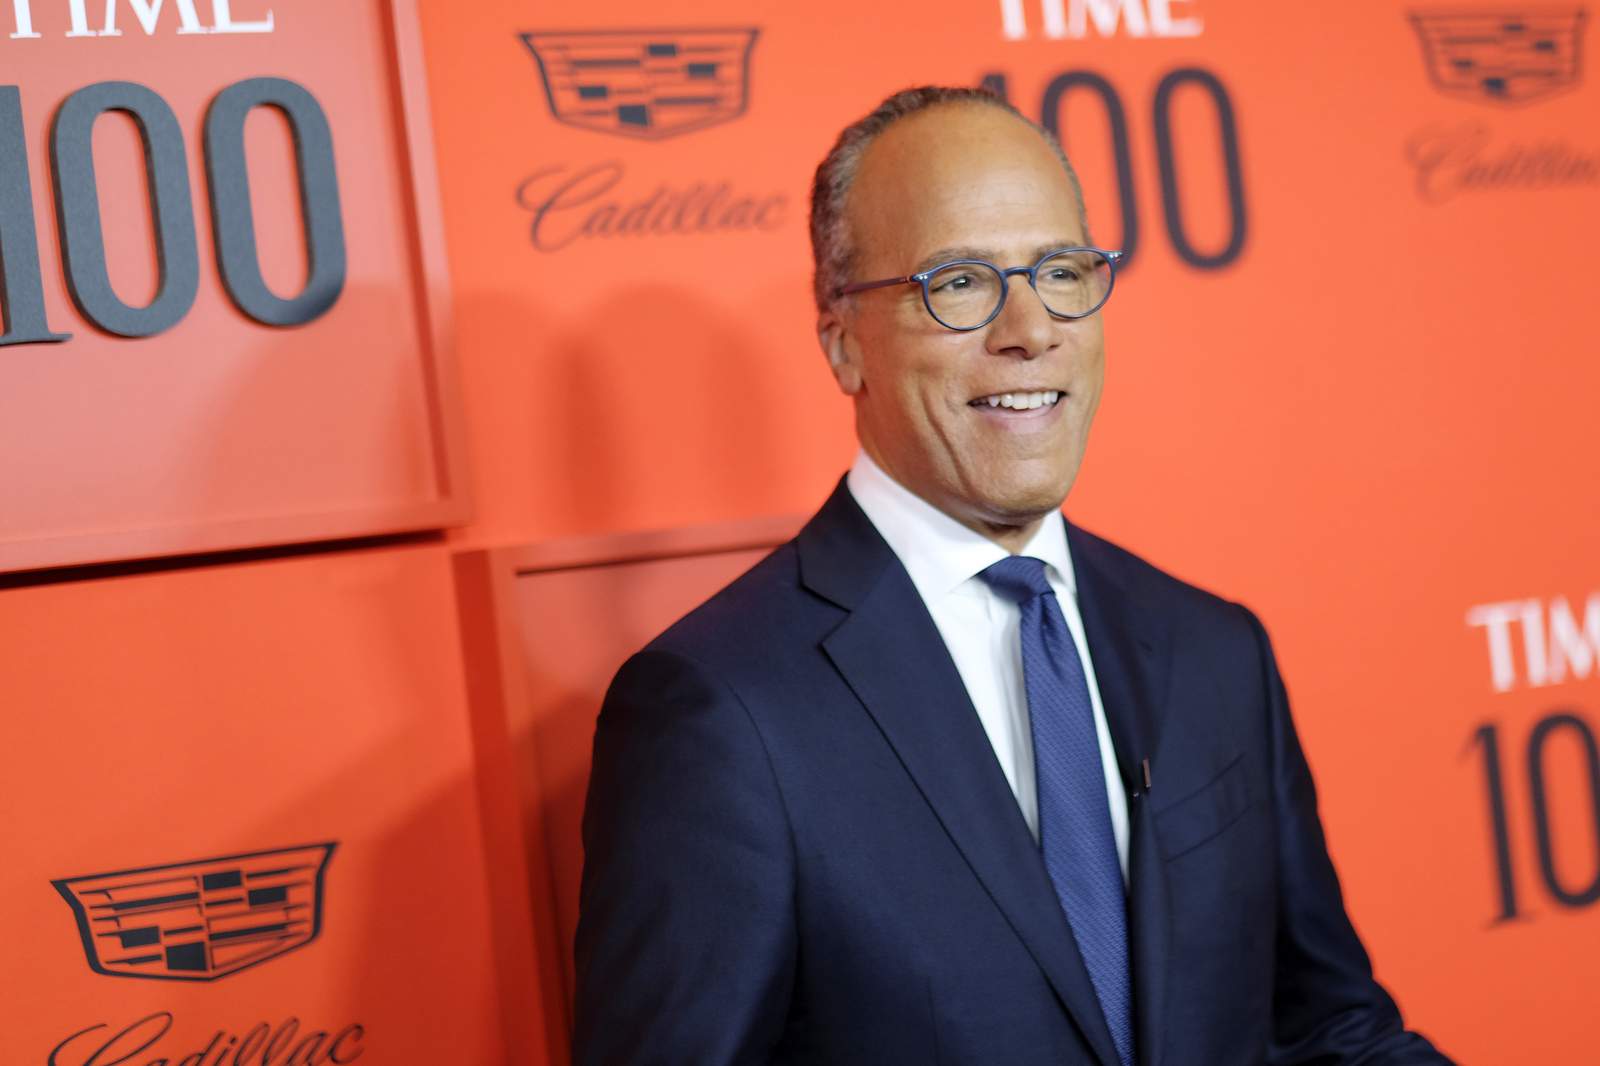 NBC’s Lester Holt is coming to Detroit for Nightly News ‘Across America’